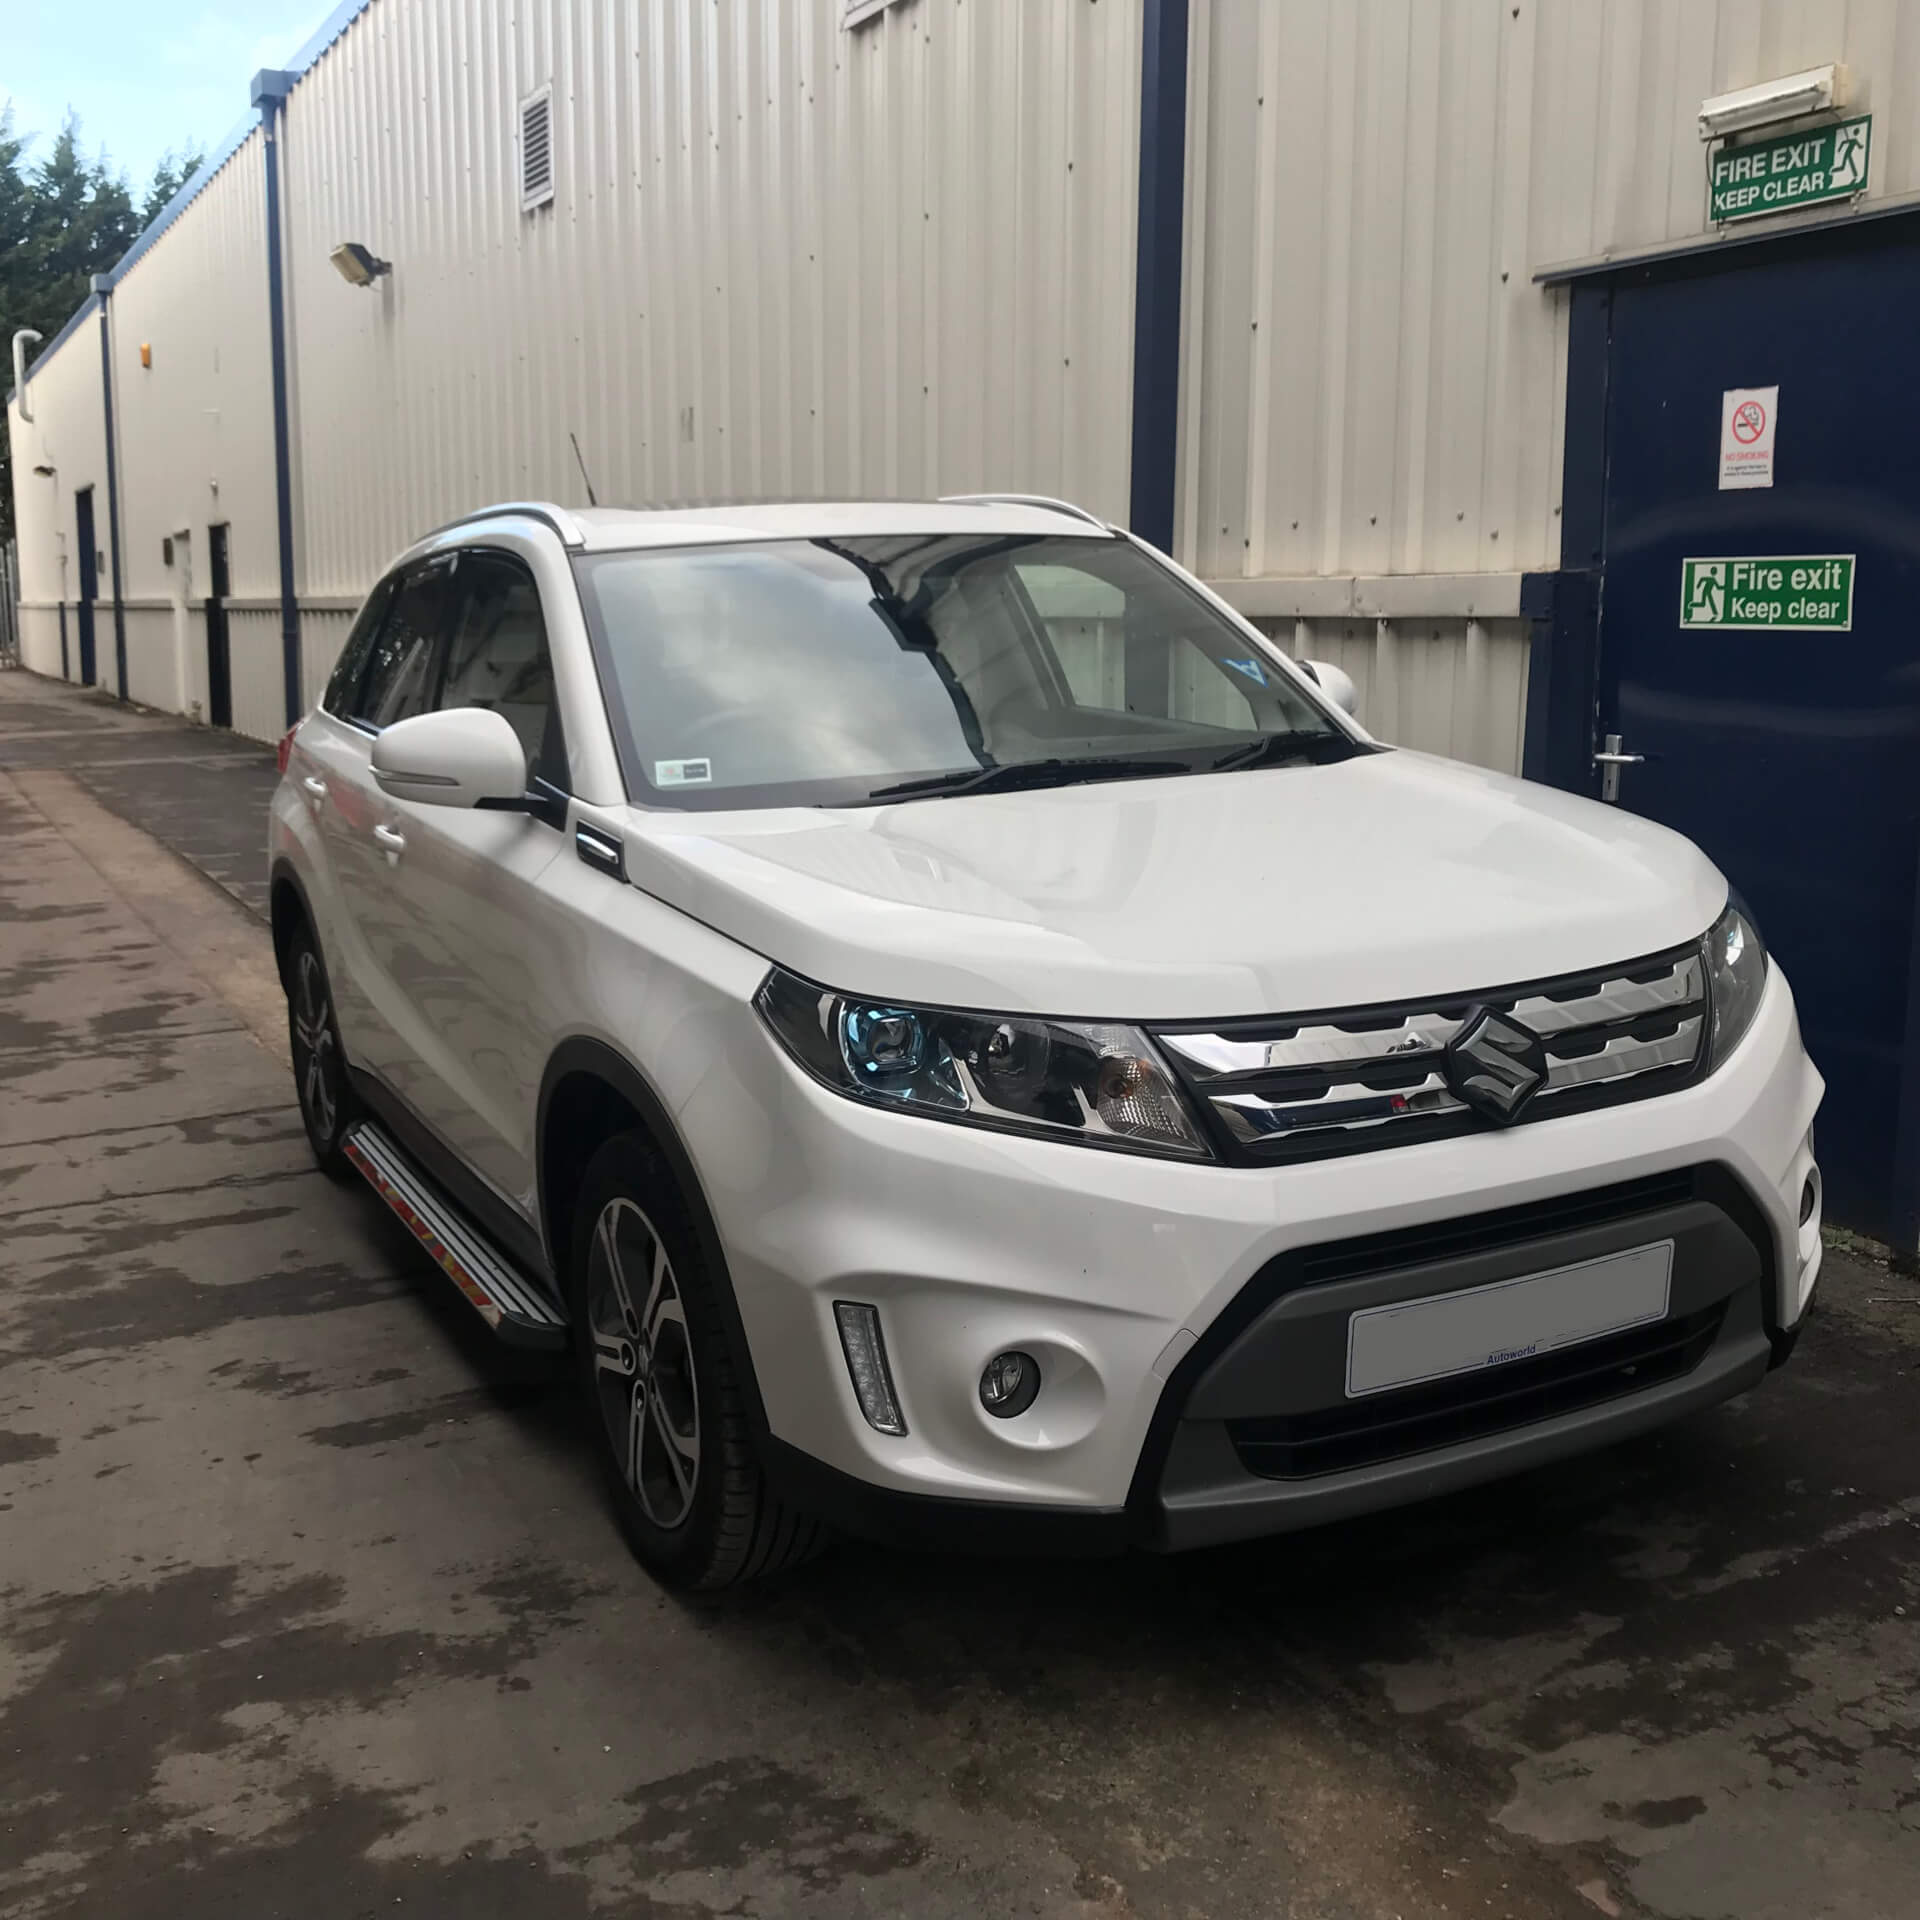 Direct4x4 accessories for Suzuki Vitara vehicles with a photo of a white Suzuki Vitara outside out depot fitted with Stingray style side steps